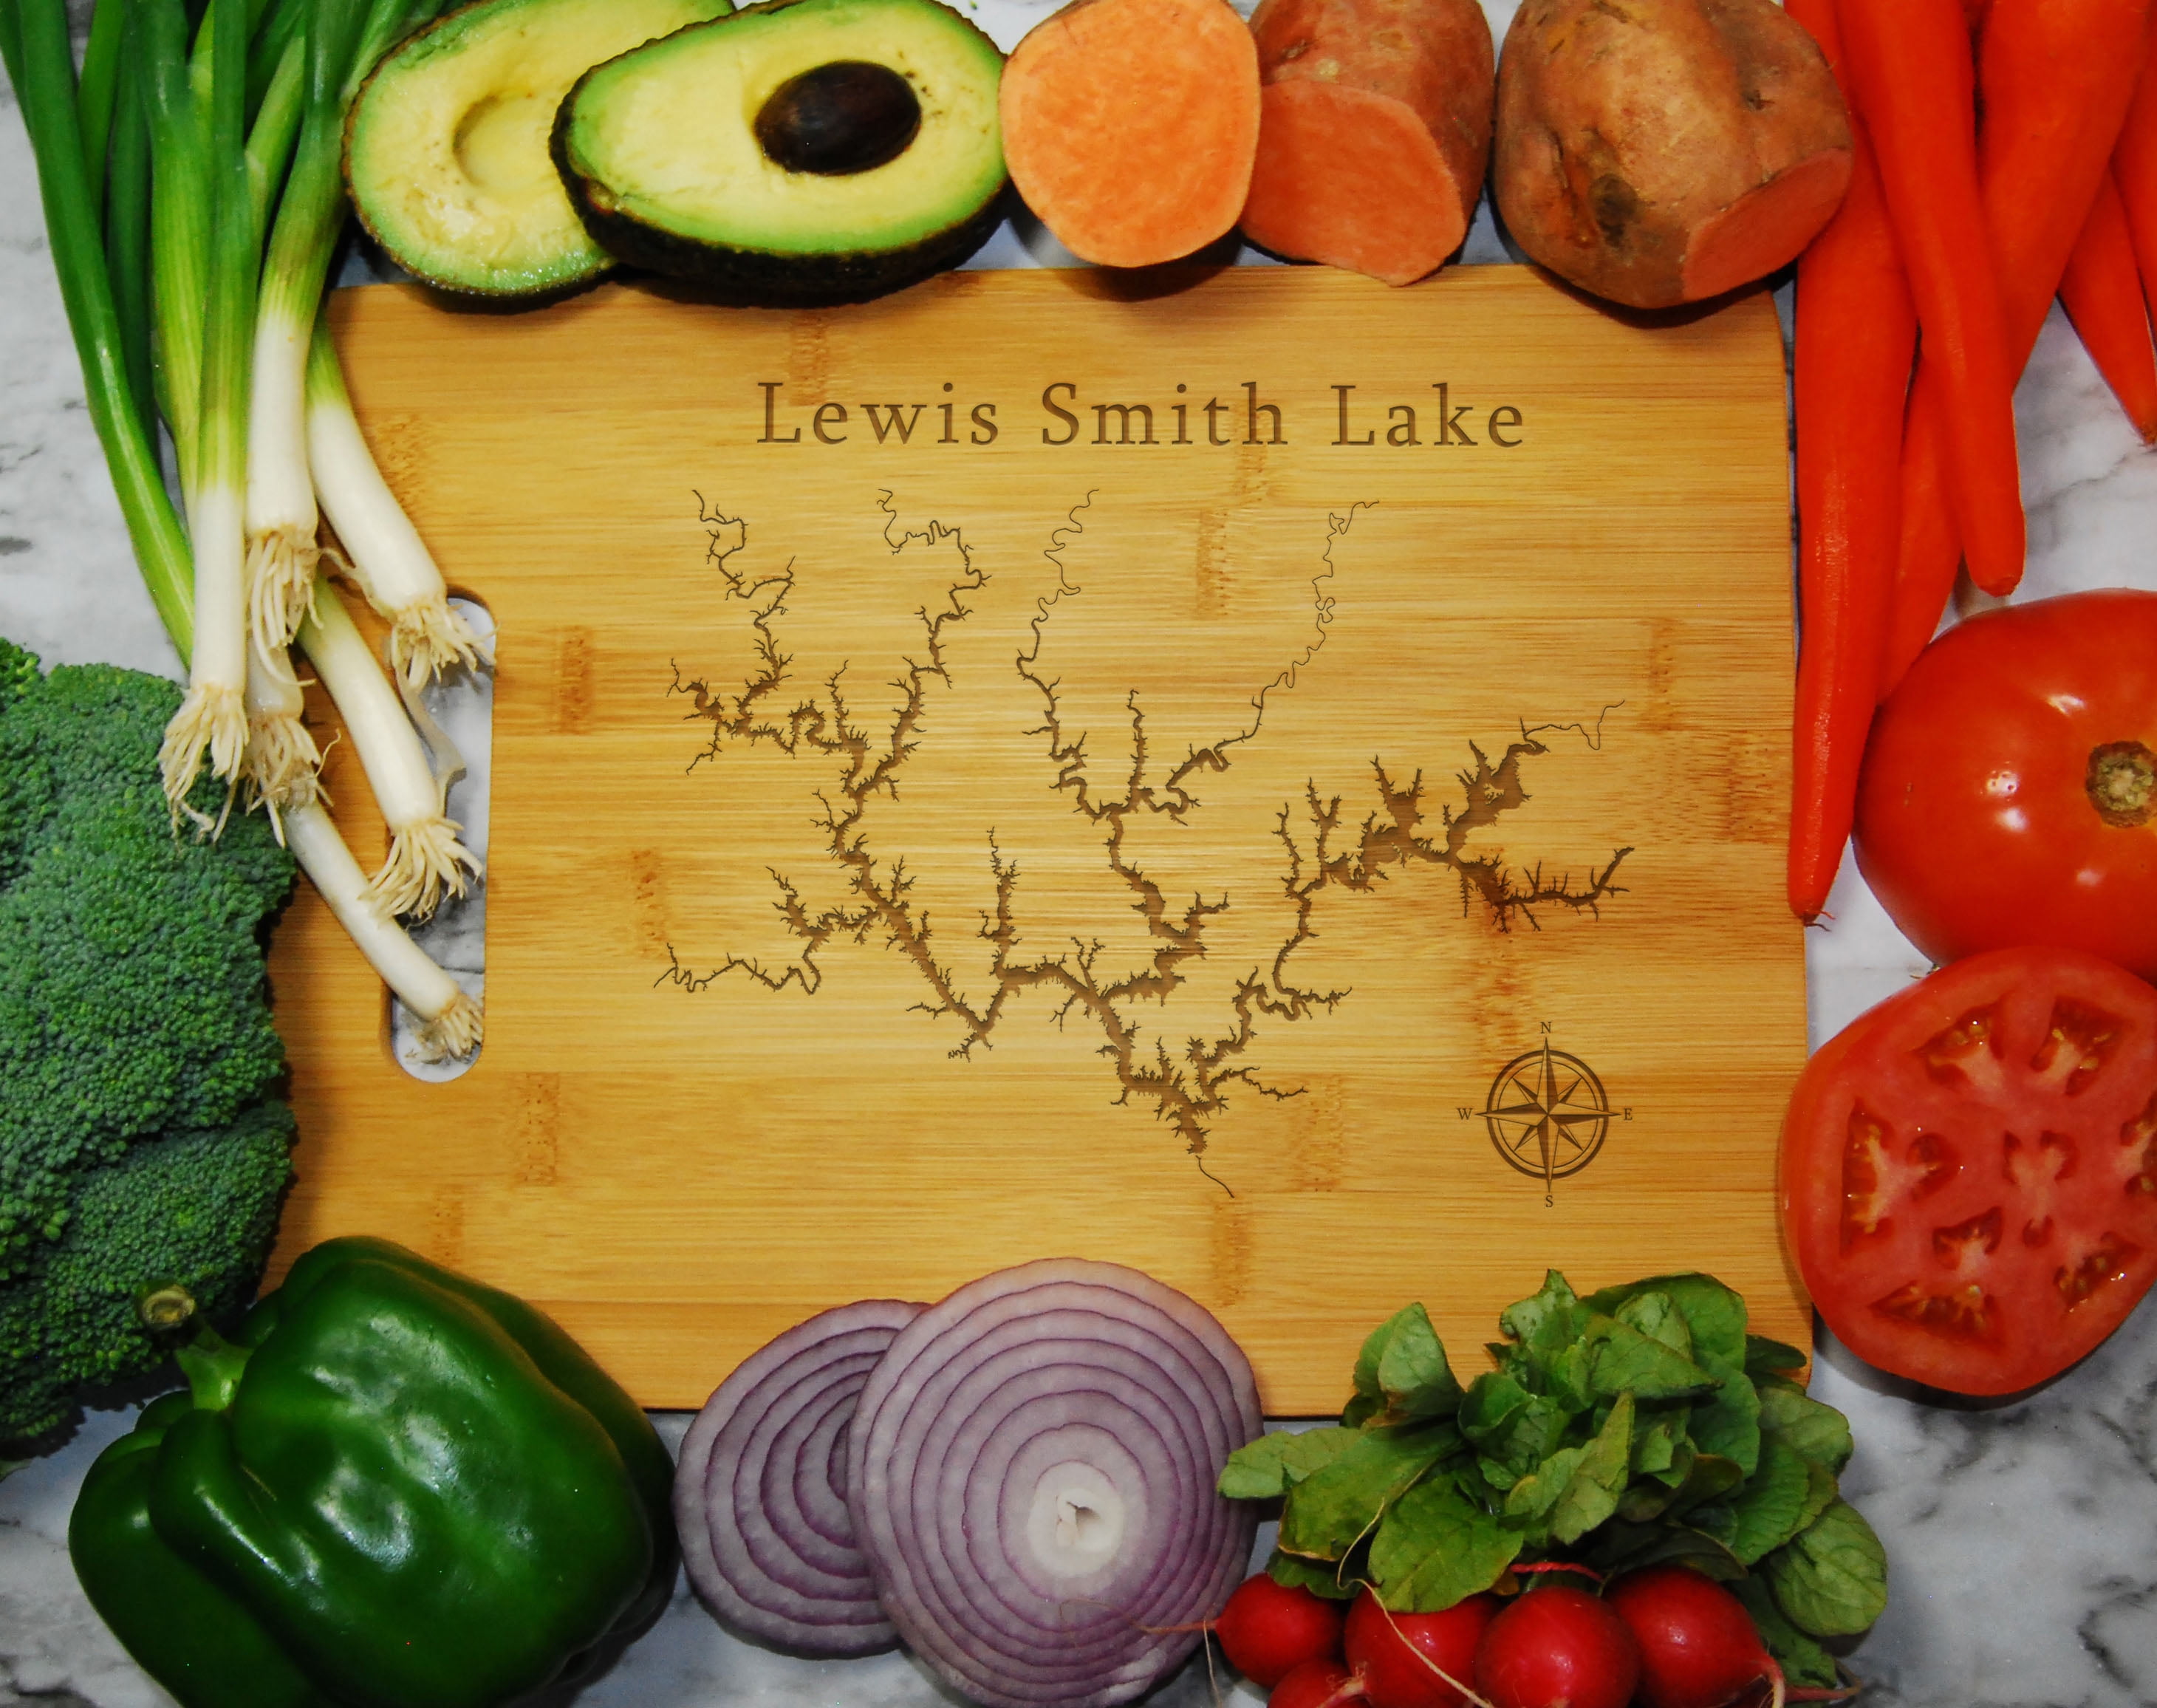 Lewis Smith Lake Map Engraved Bamboo Cutting Board 9.75x13.75 inches Alabama